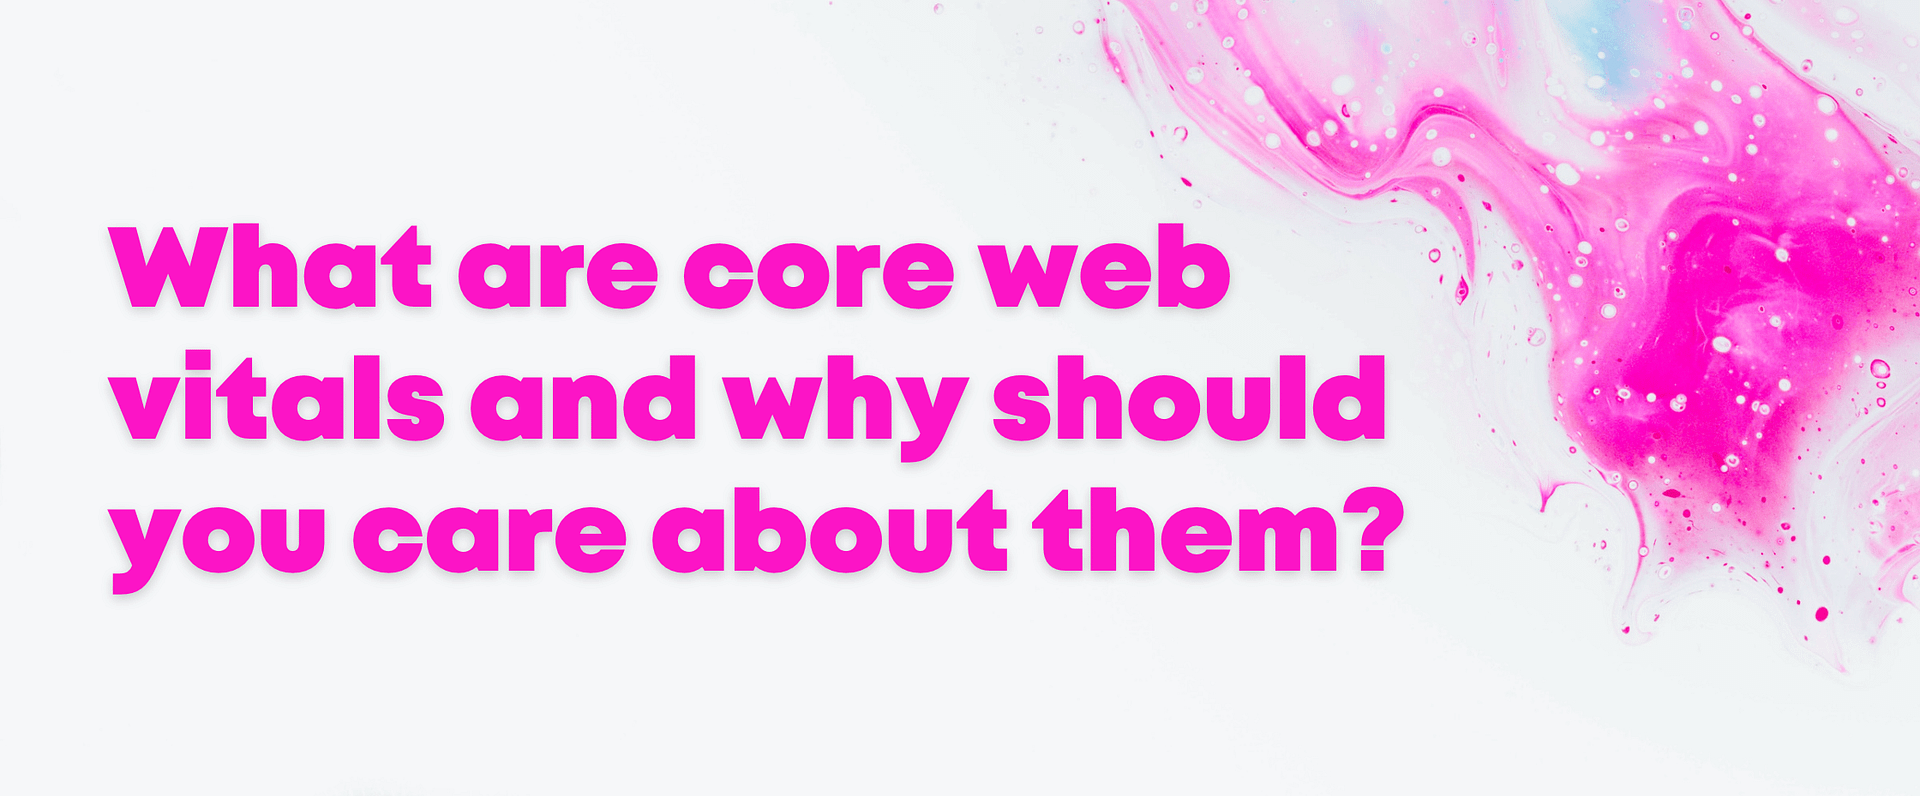 A tile for a blog titled "What are core web vitals and why should you care about them?"